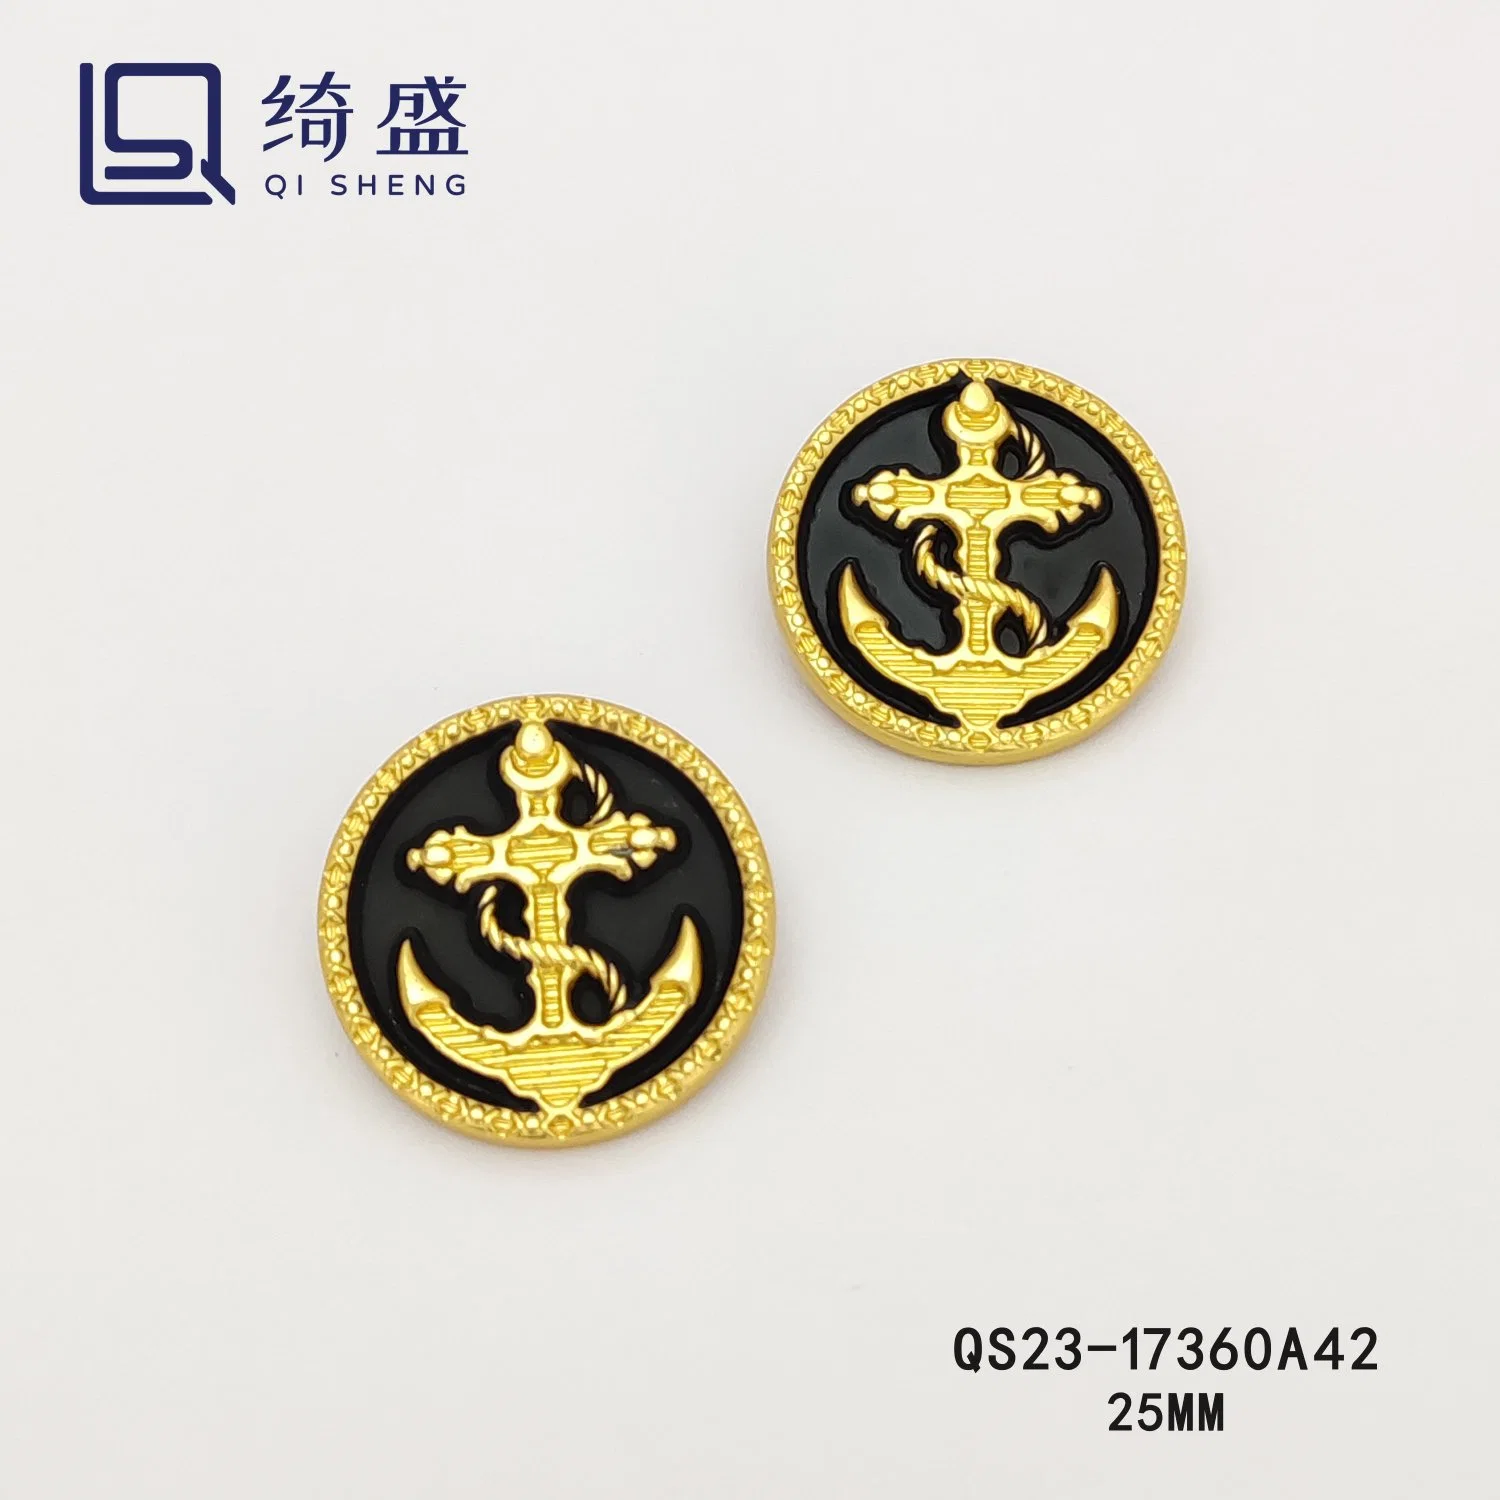 Wholesales Boat Anchor Round Design Alloy/Fancy/Metal/Shank Button